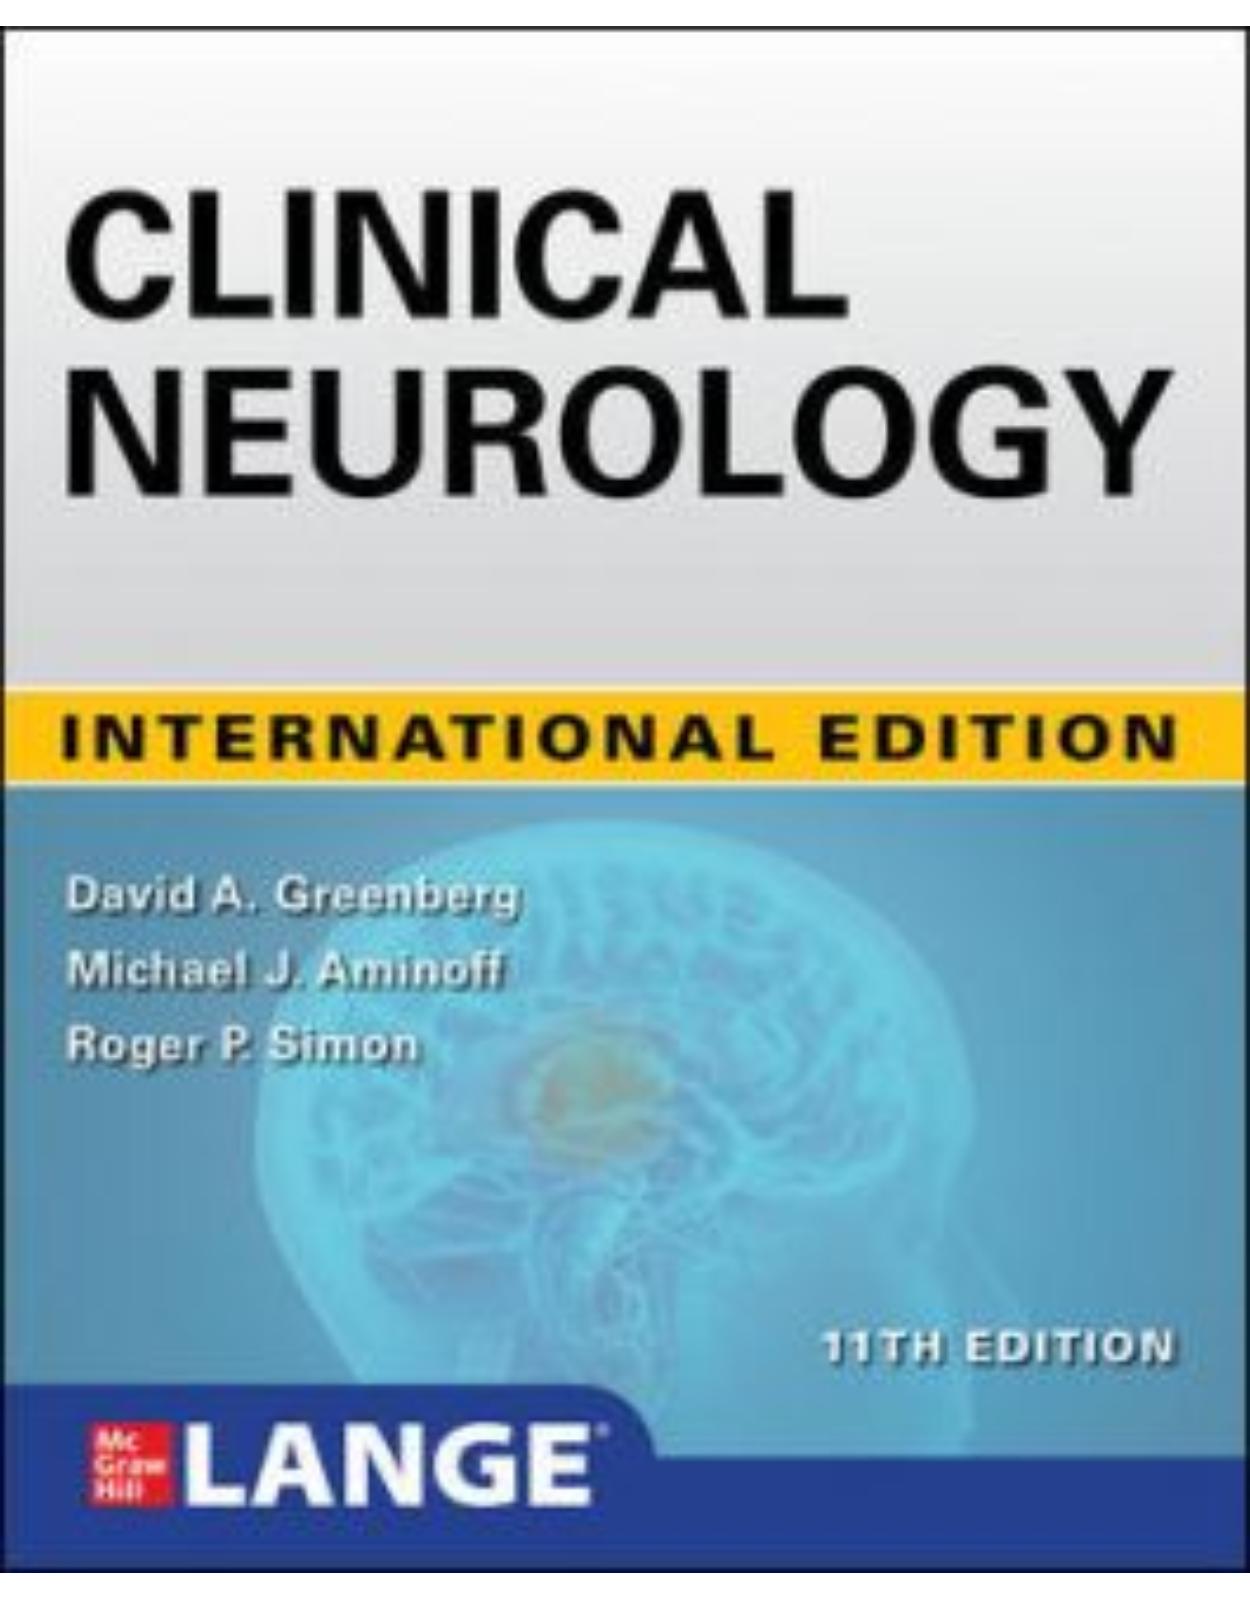 Ie Lange Clinical Neurology, 11th Edition